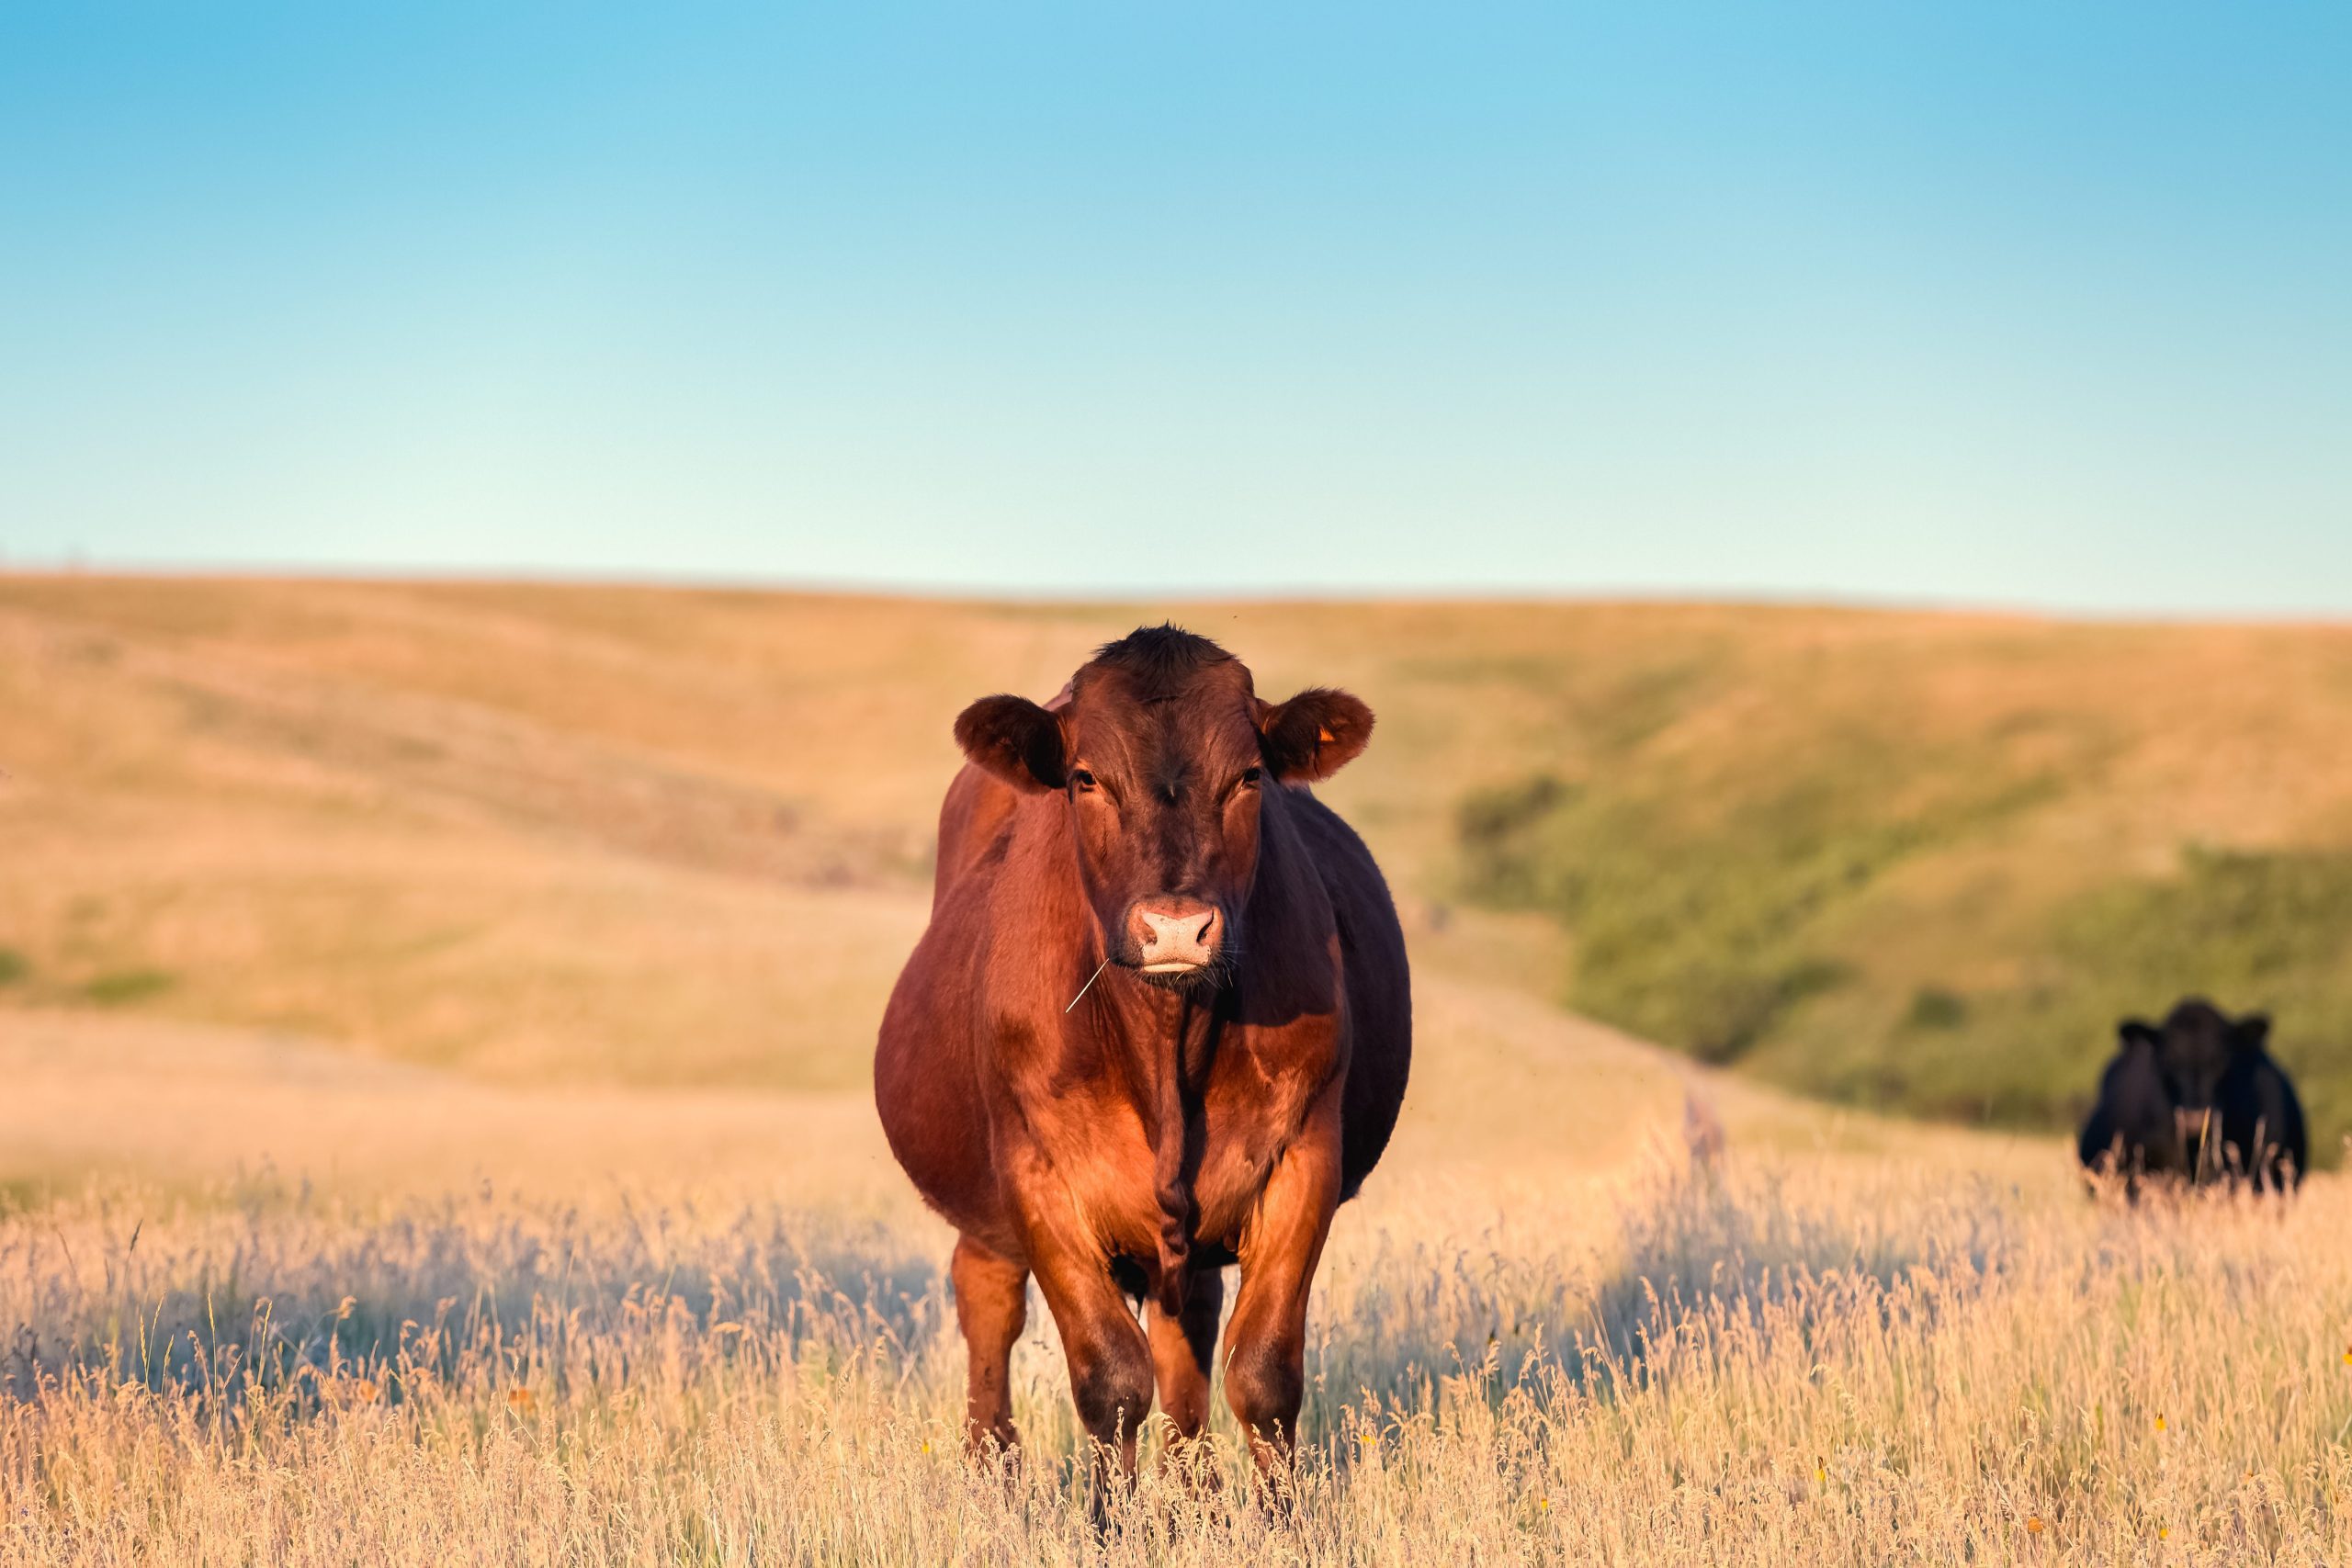 Red Angus cow standing in golden grass on a Montana ranch looking toward camera view.